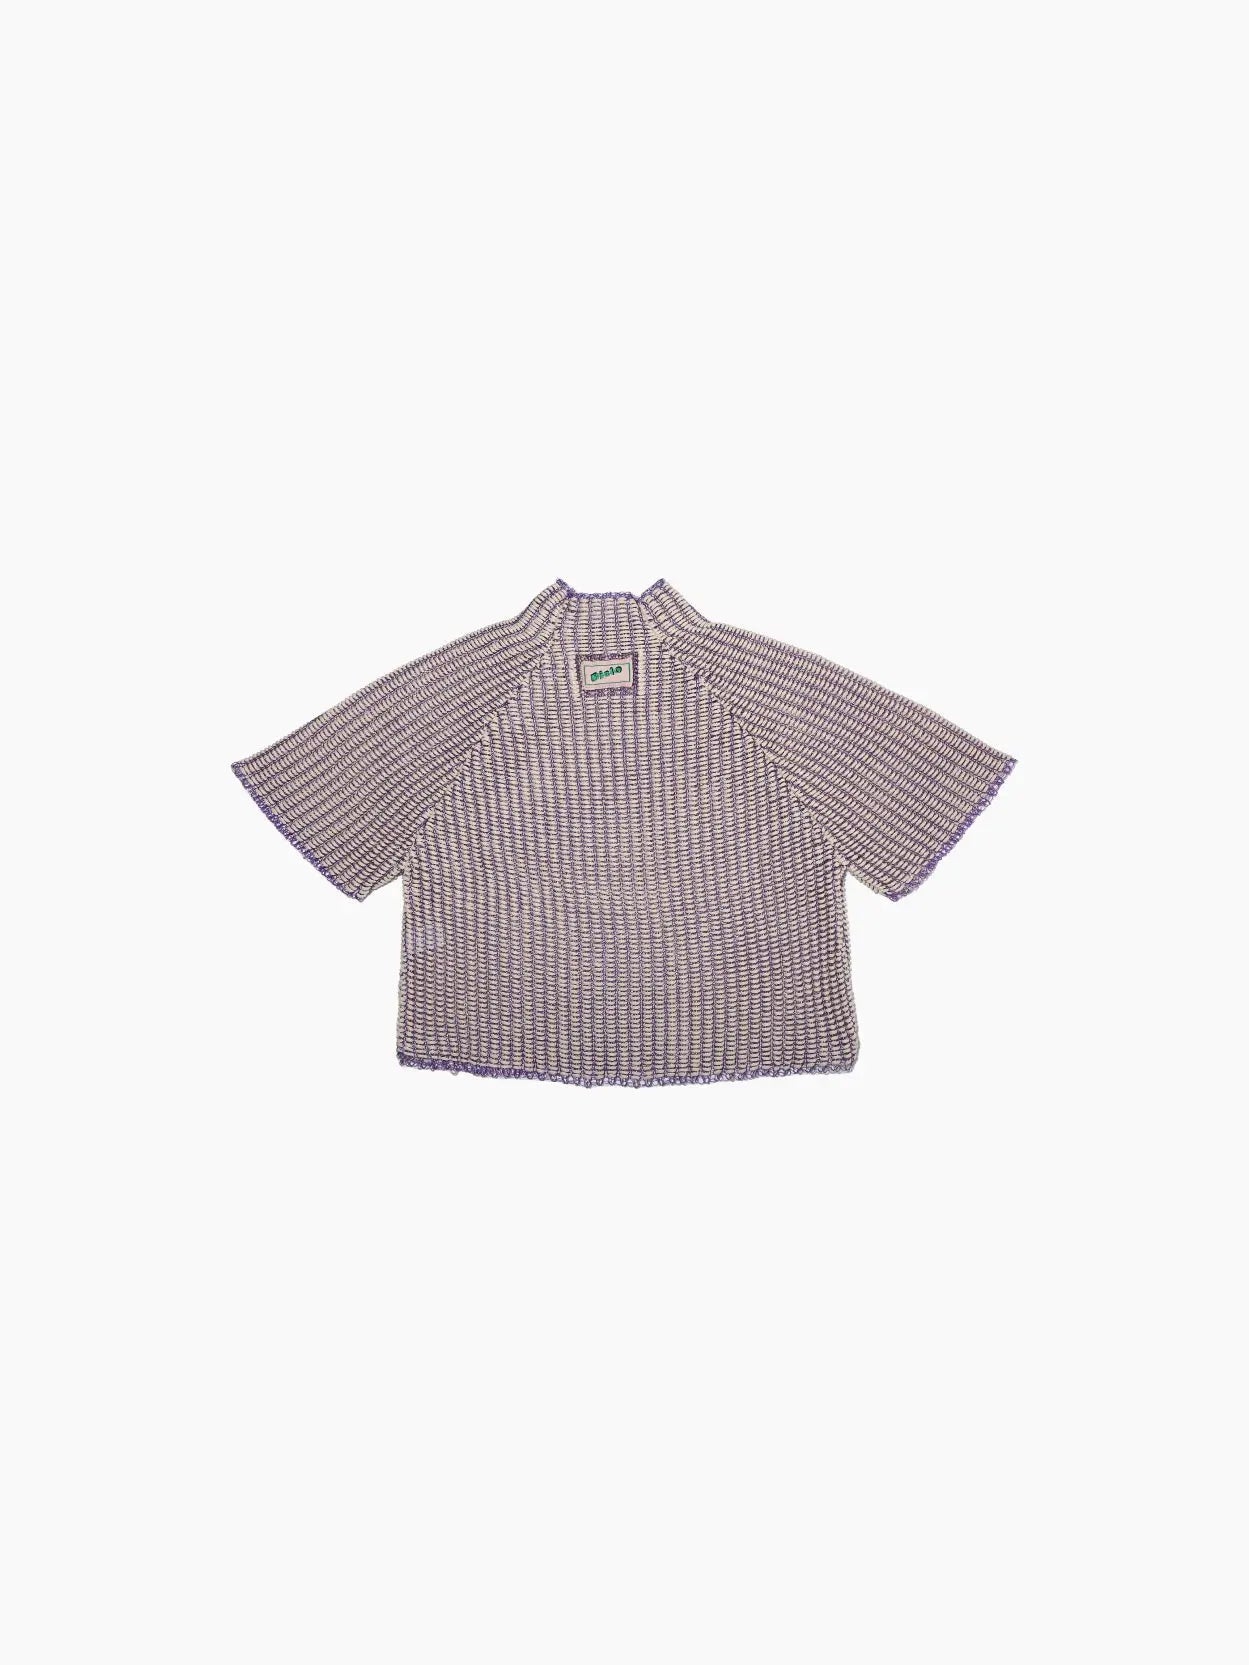 A wide-sleeve, knitted Keya Sweater Lavender from Bielo in a light purple color with a loose fit. The design features horizontal ribbed patterns and slight, rounded neck detailing. The hem and sleeve edges have subtle, dark purple accents. The top is laid flat on a white background.